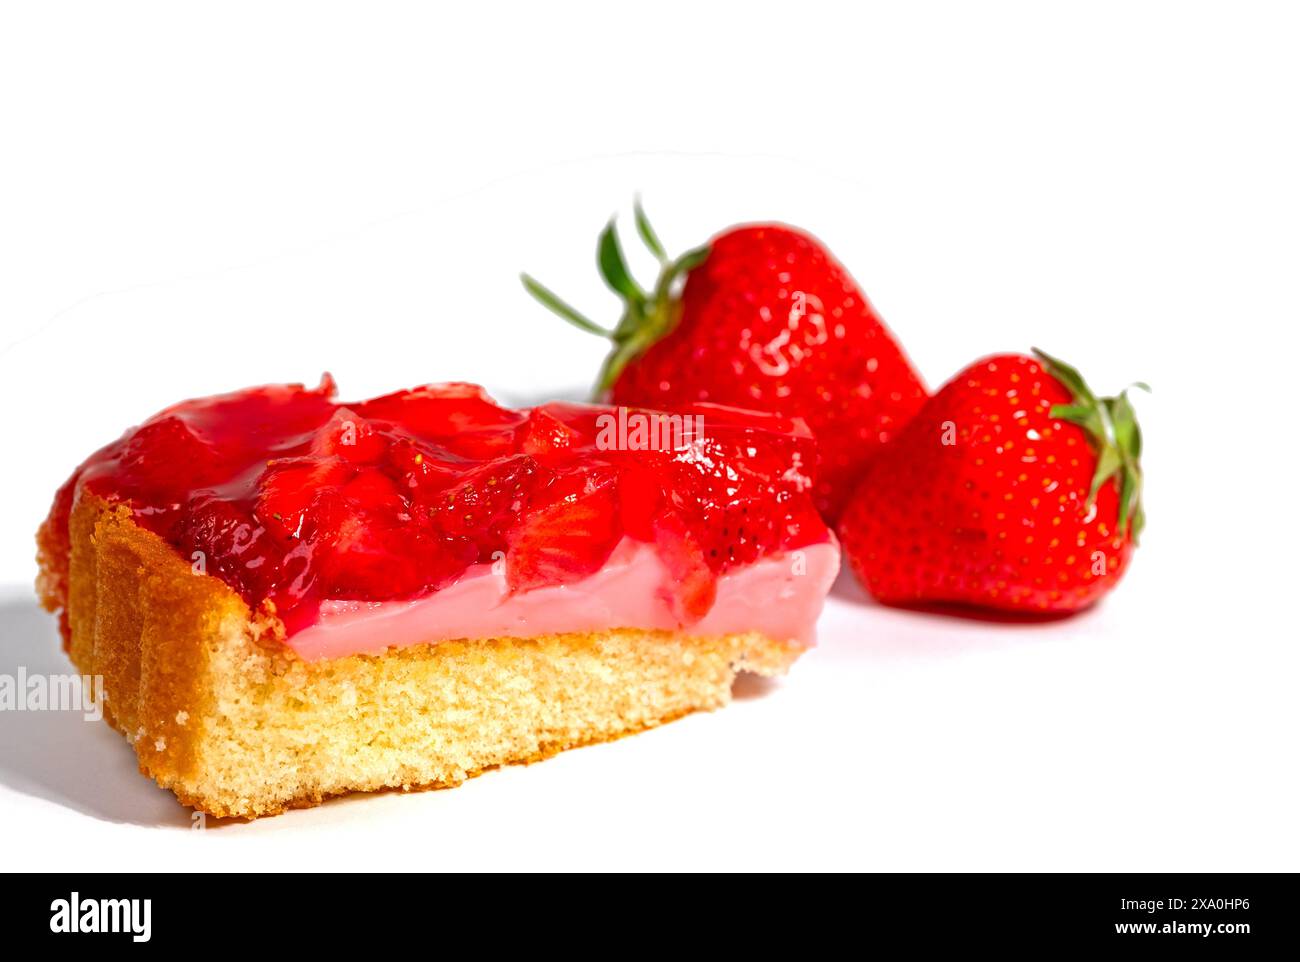 Strawberry cake against a white background Stock Photo